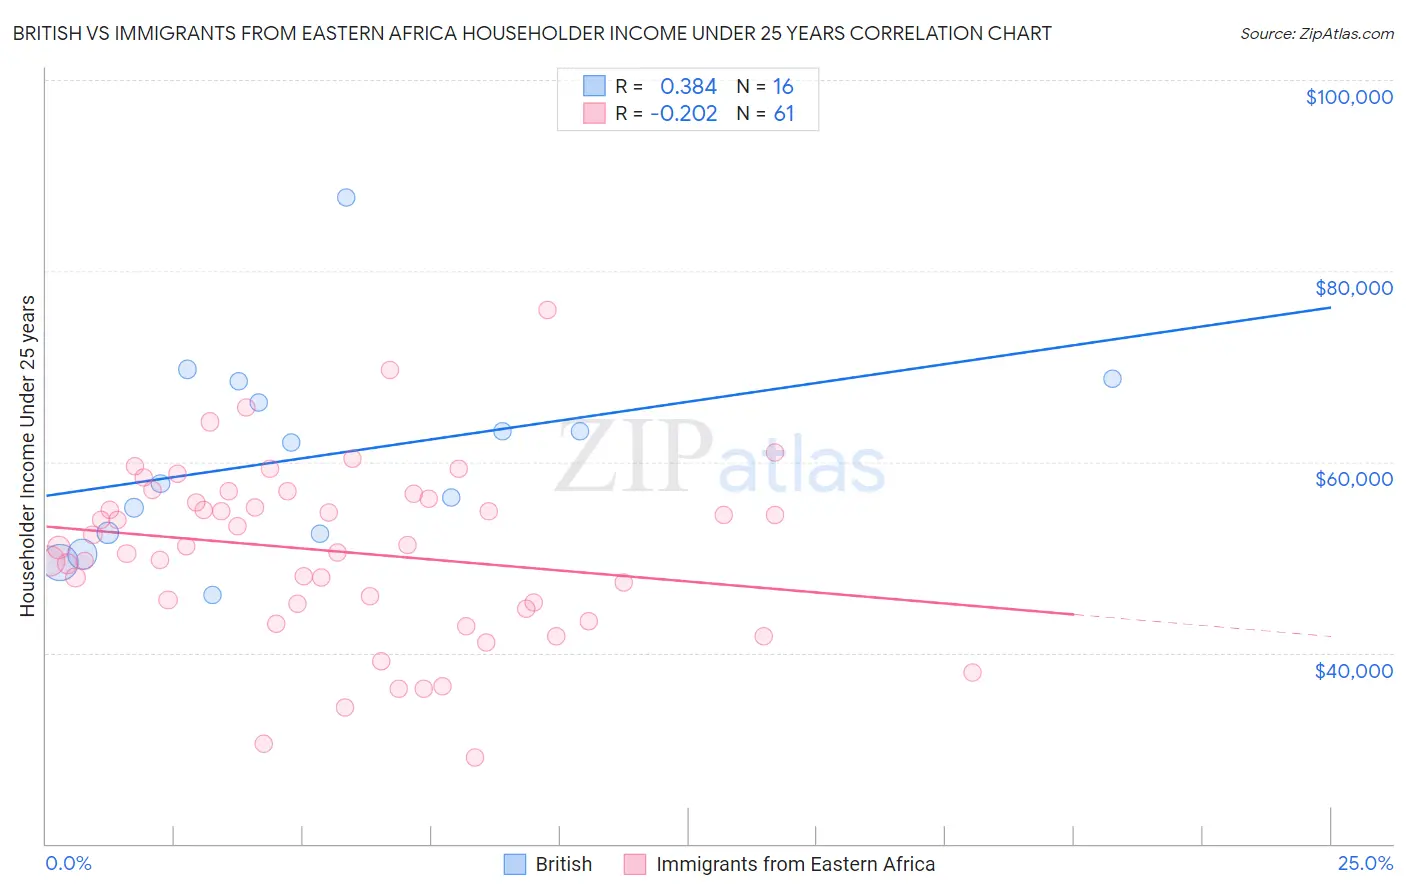 British vs Immigrants from Eastern Africa Householder Income Under 25 years